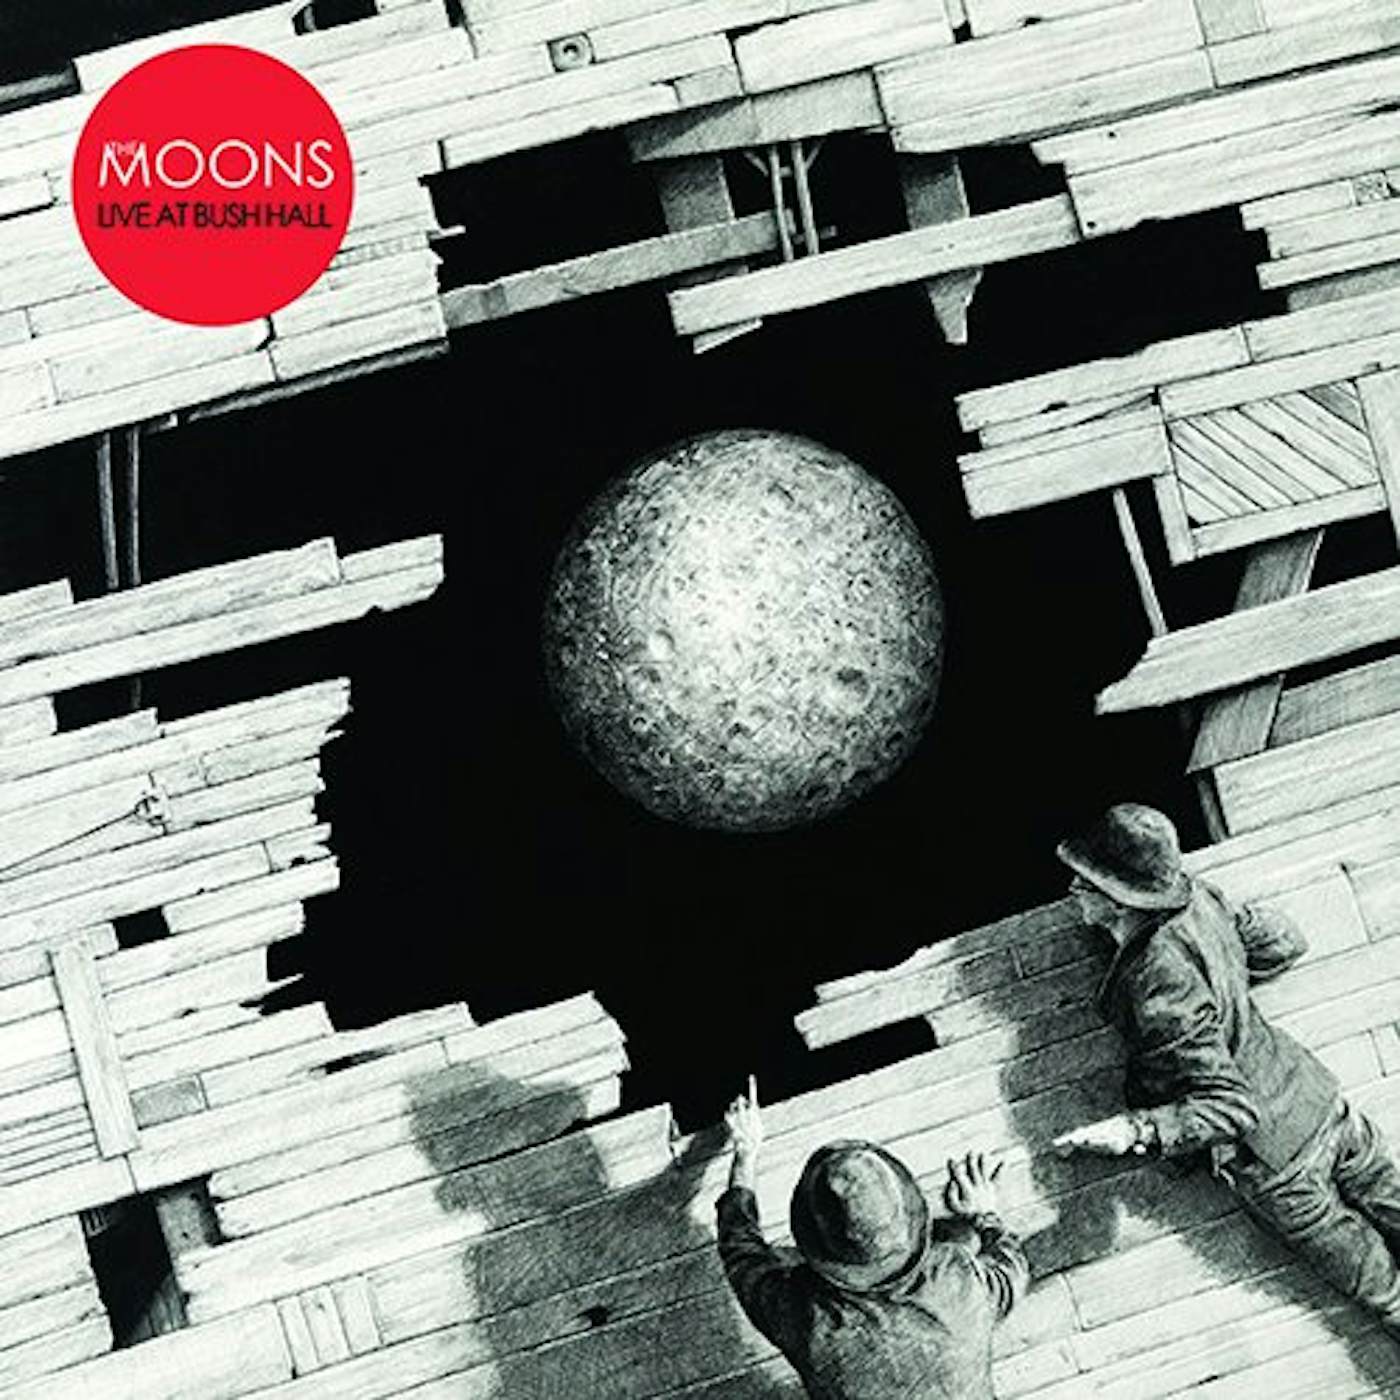 The Moons LIVE AT BUSH HALL Vinyl Record - Colored Vinyl, Limited Edition, 180 Gram Pressing, Red Vinyl